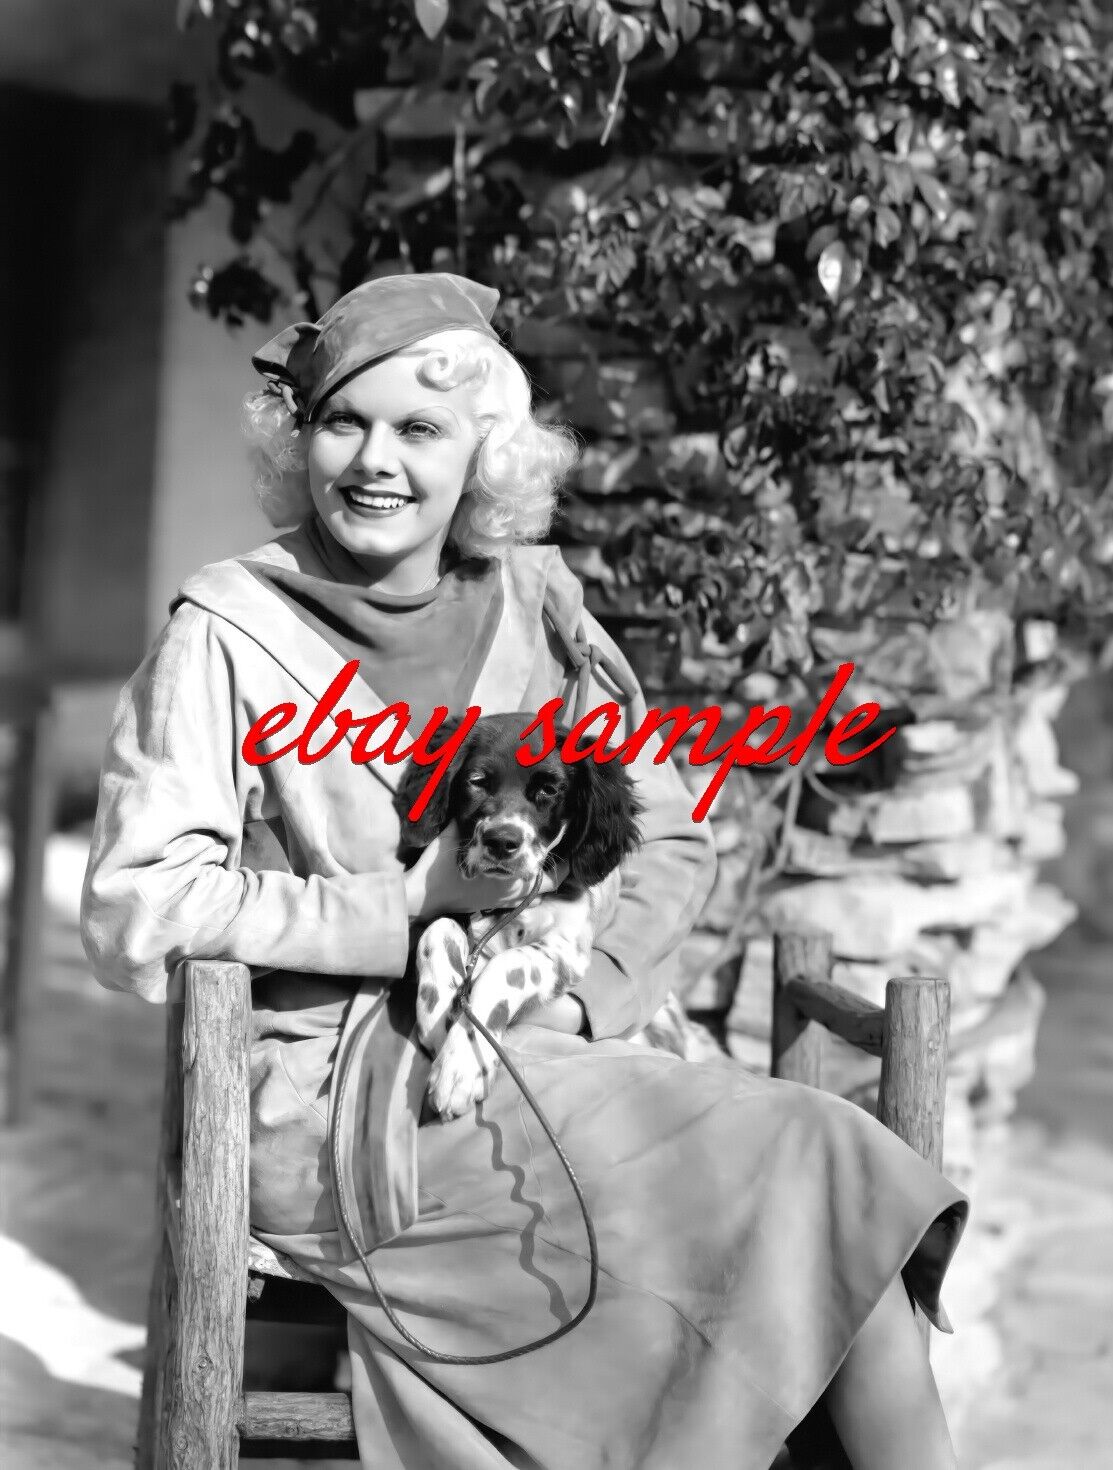 JEAN HARLOW CANDID PHOTO - Holding her springer spaniel puppy dog